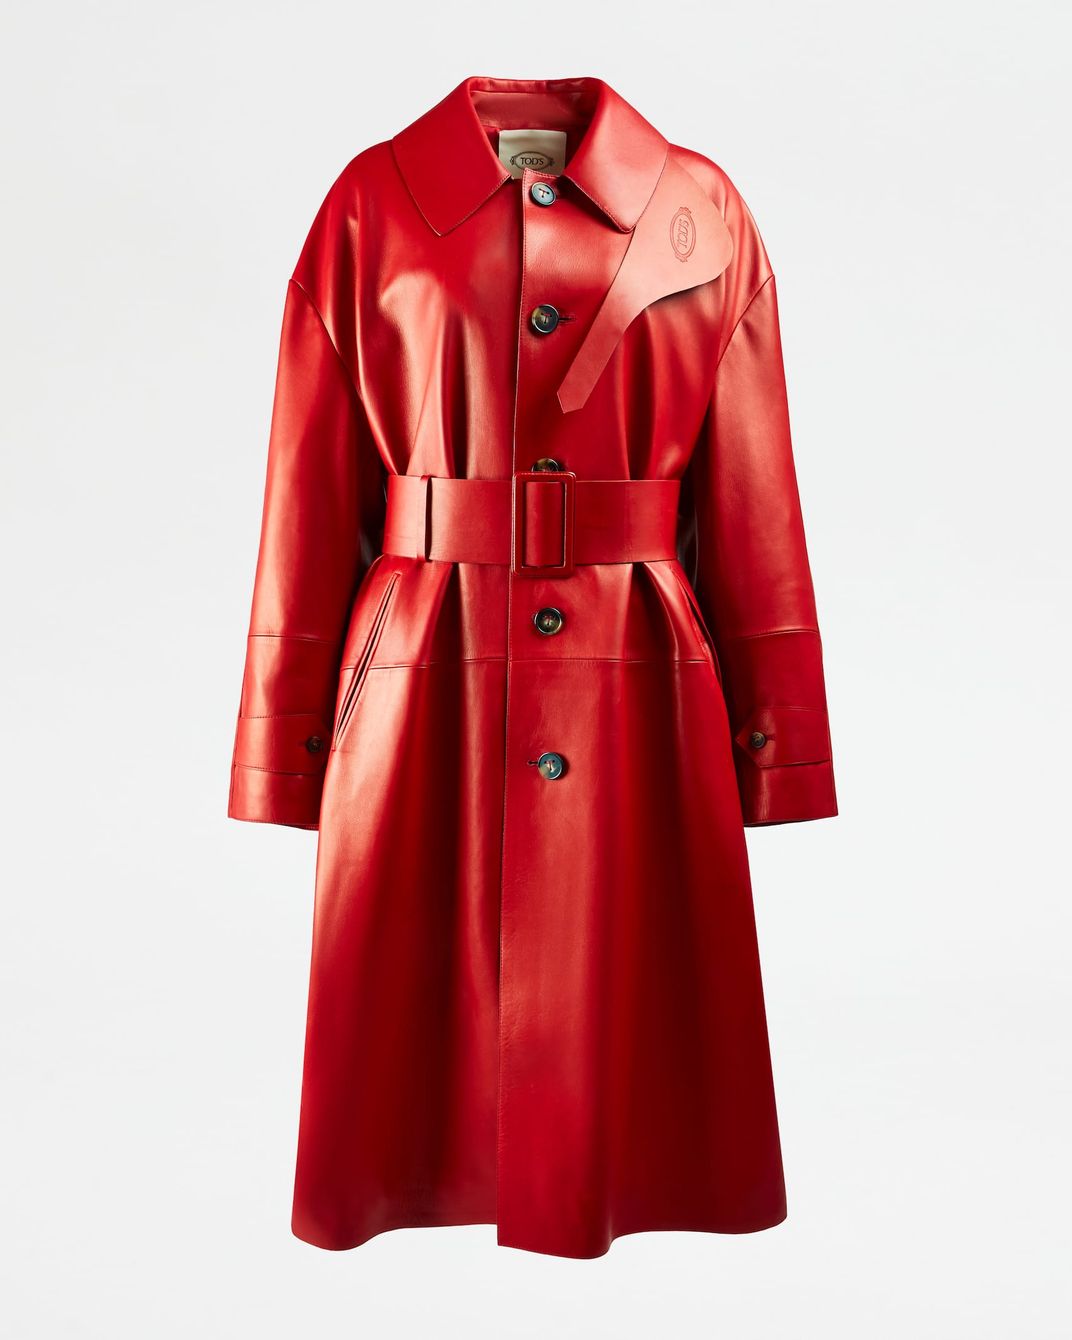 Miss Selfridge Vinyl Faux Leather Trench Coat in Bright Red